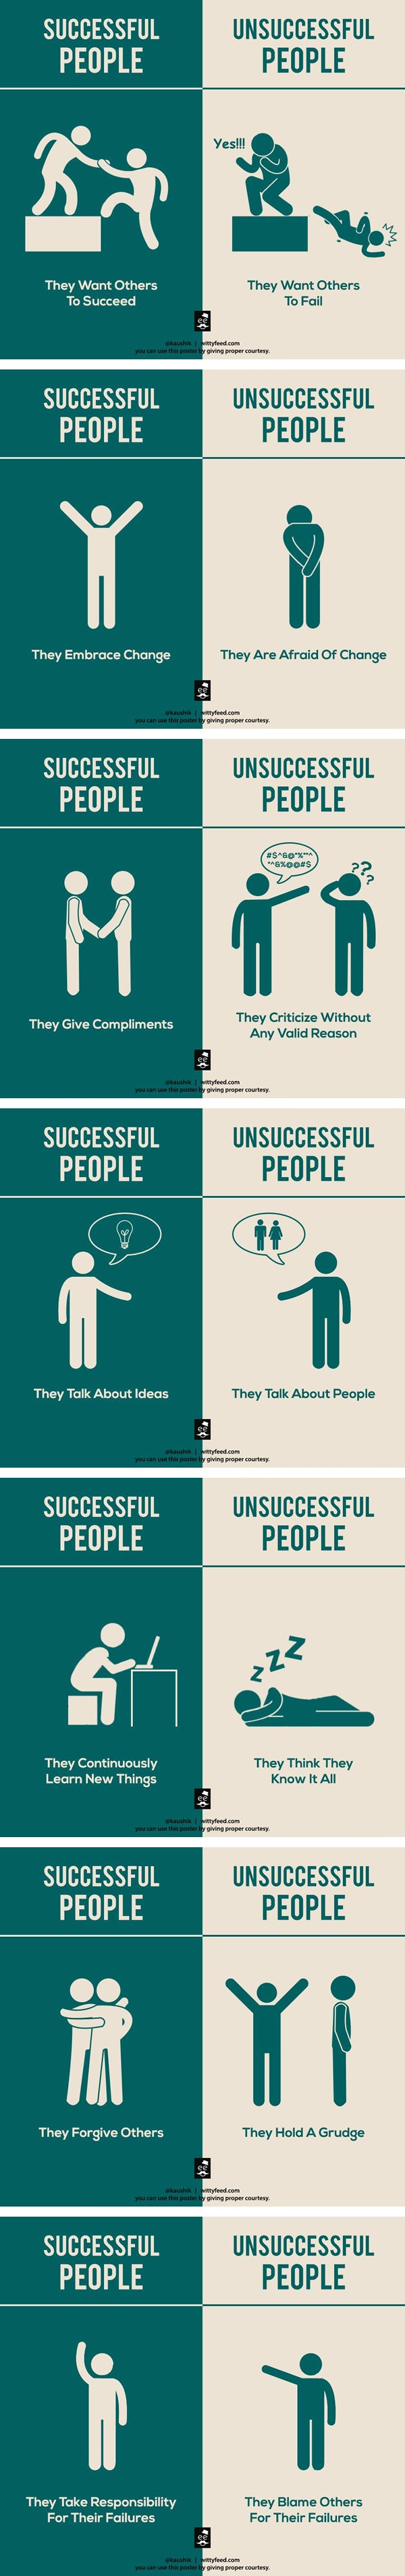 Differences between successful and unsuccessful people